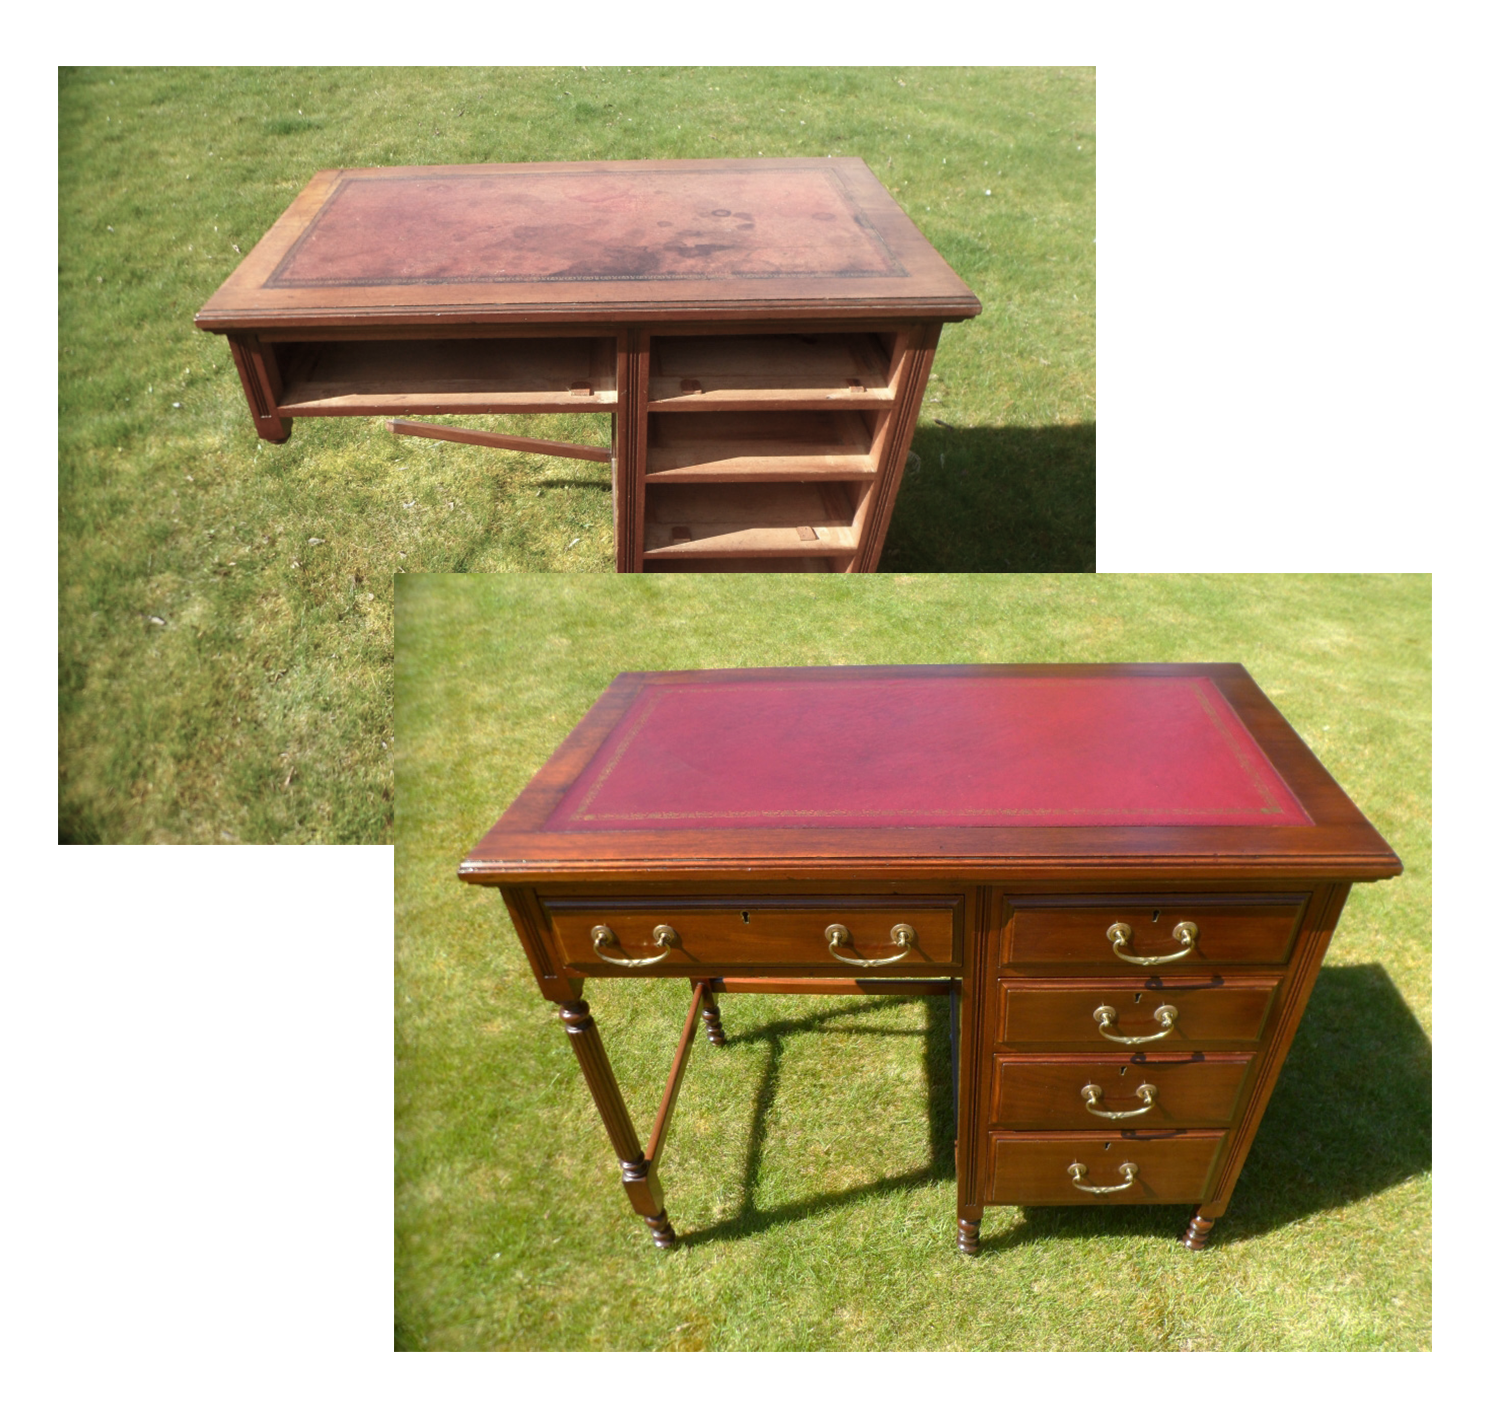 before and after desk